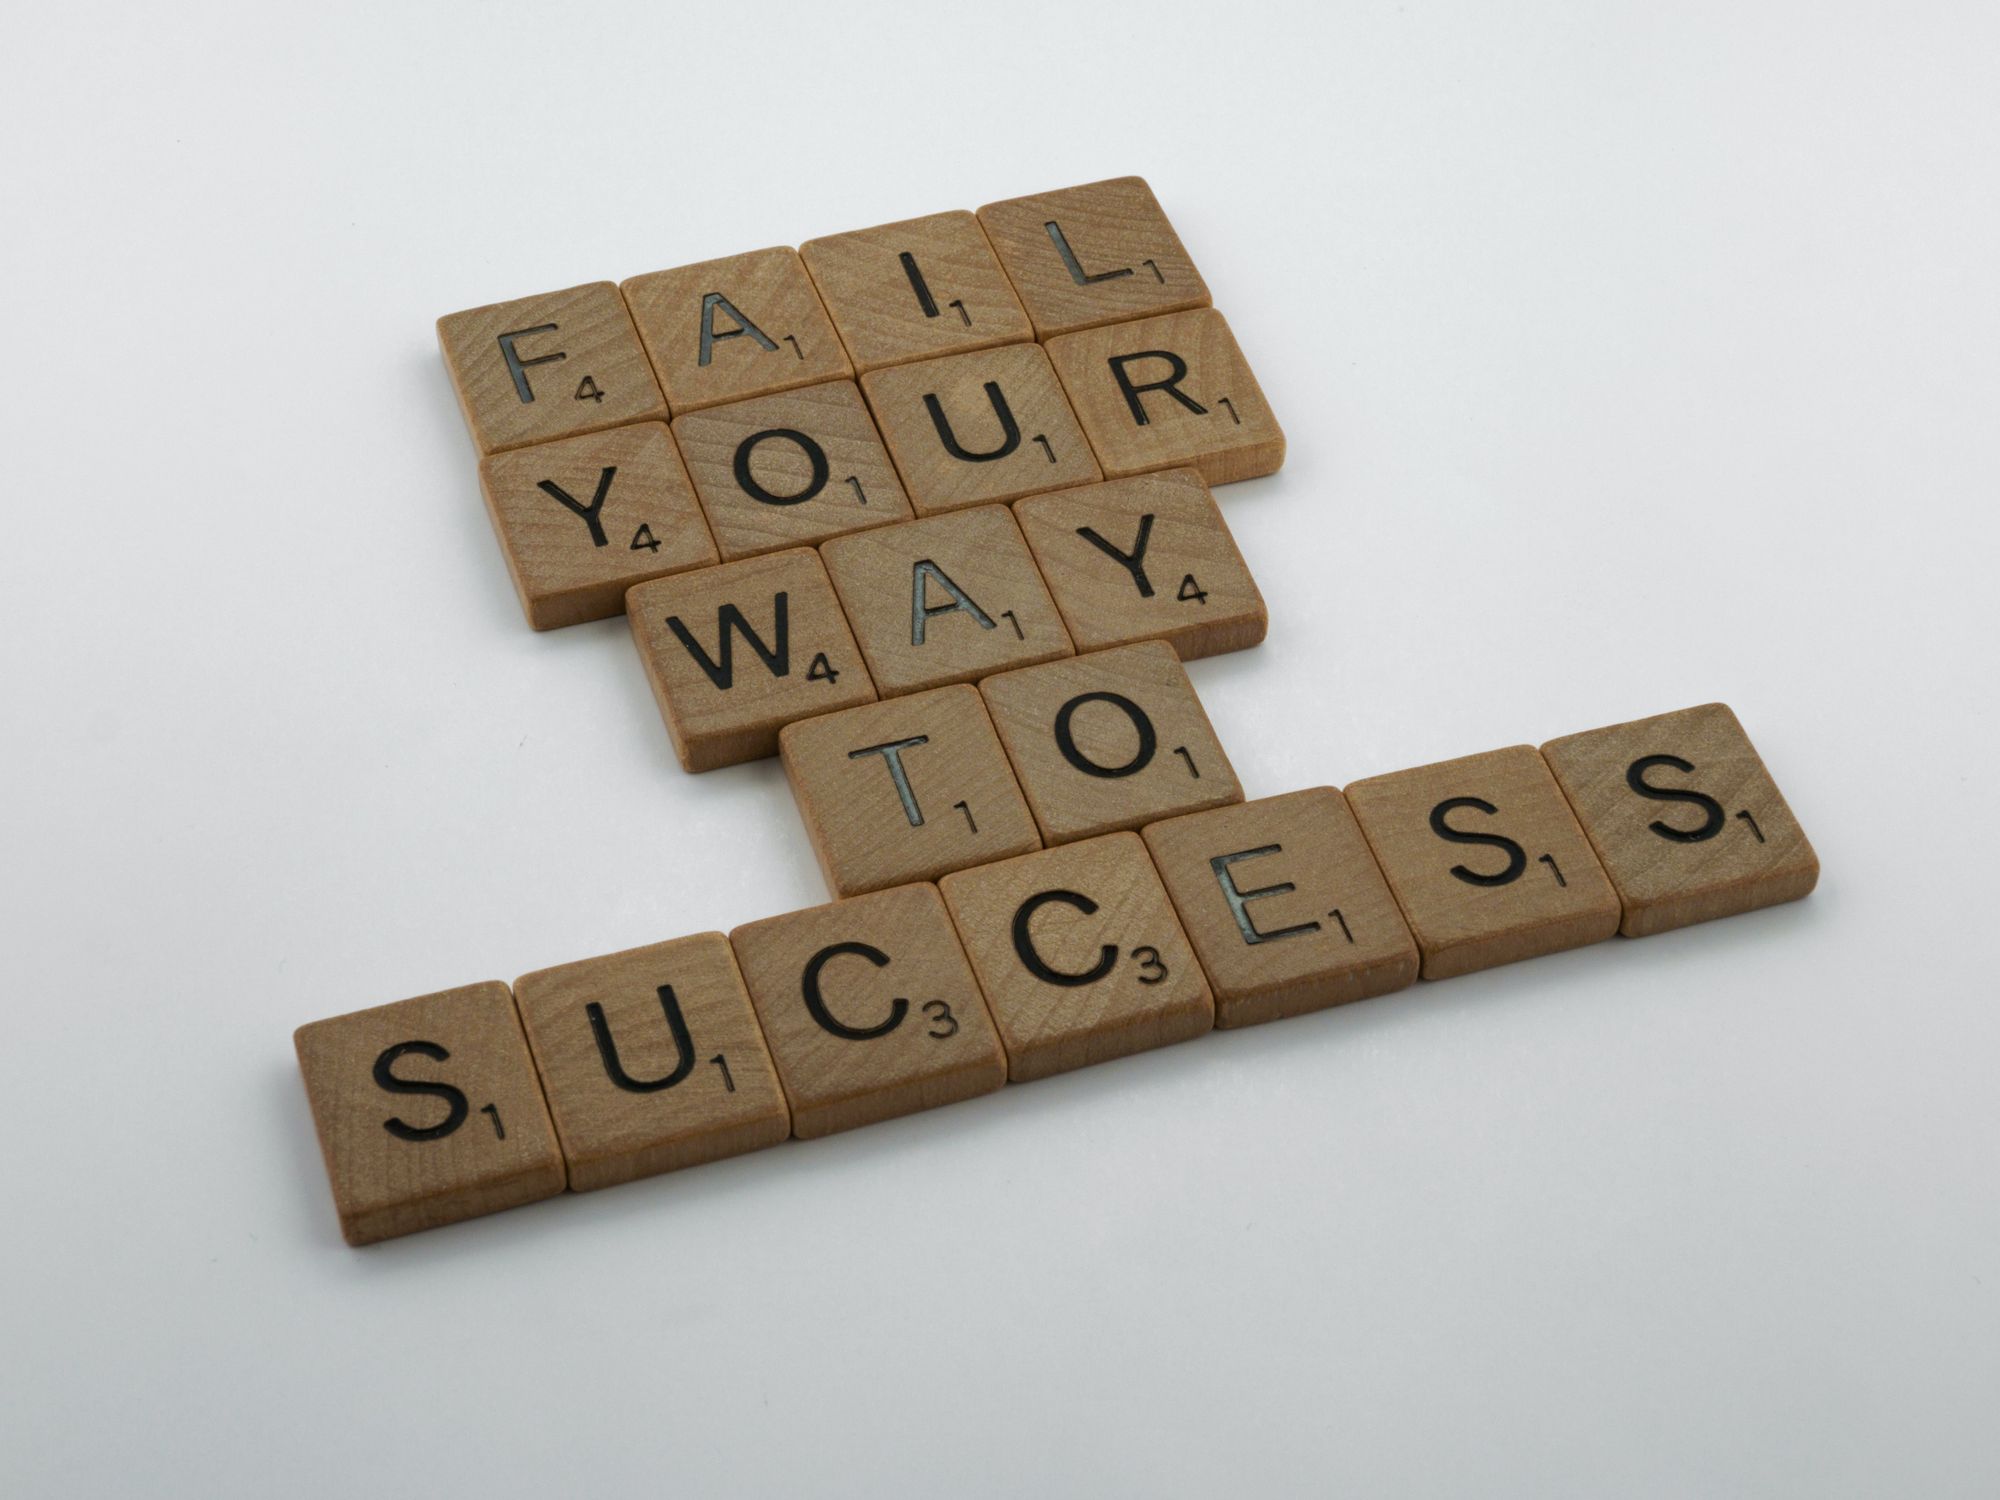 Scrabble pieces reading "Fail your way to success"